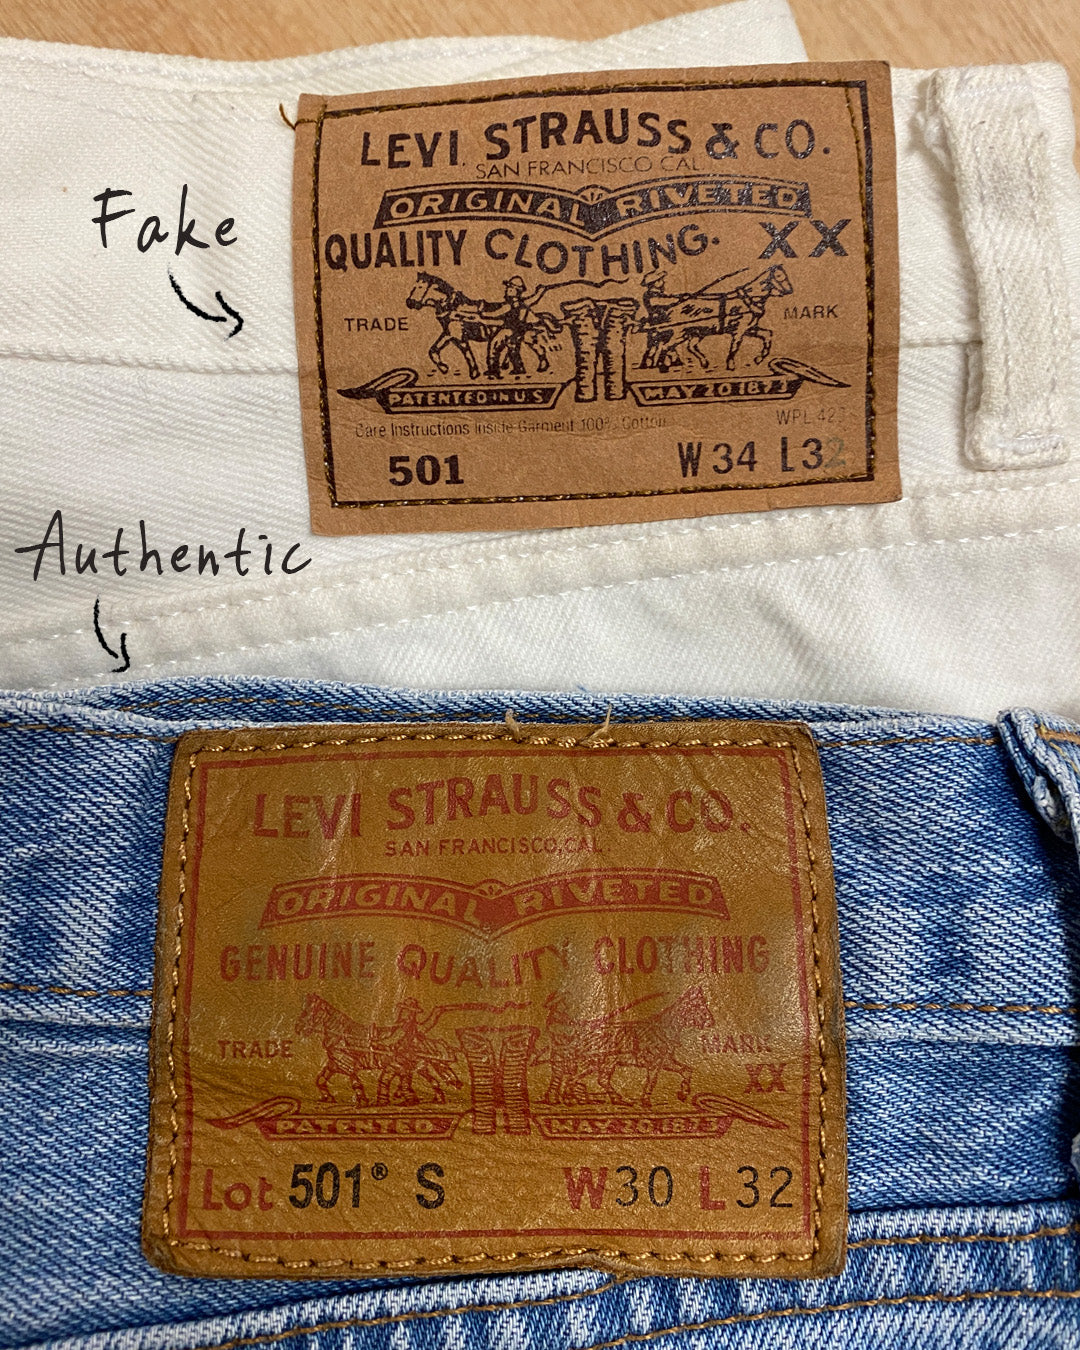 How to recognize whether a garment is real or is fake